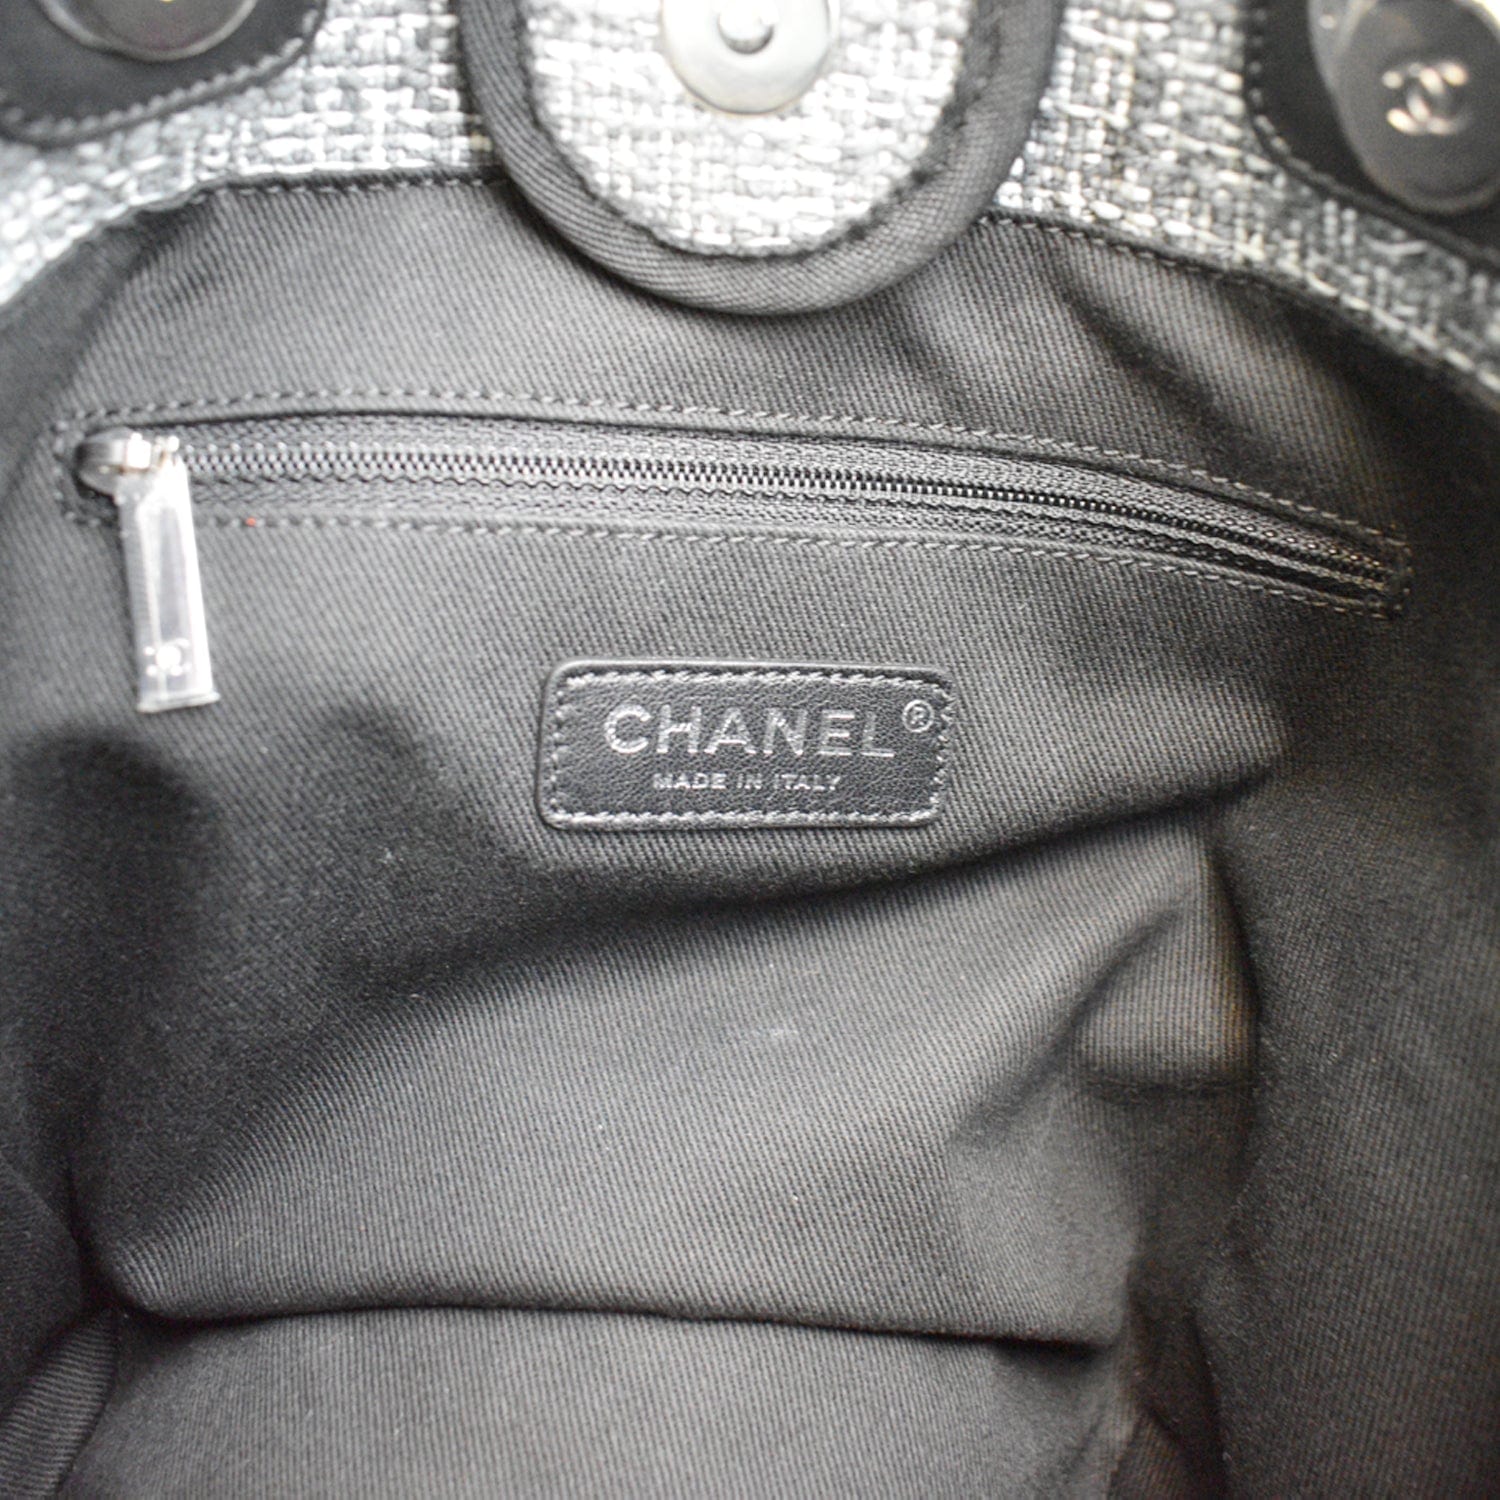 Authentic Chanel Circa 2009 Black Solid Acrylic Top on sale at JHROP.  Luxury Designer Consignment Resale @jhrop_official